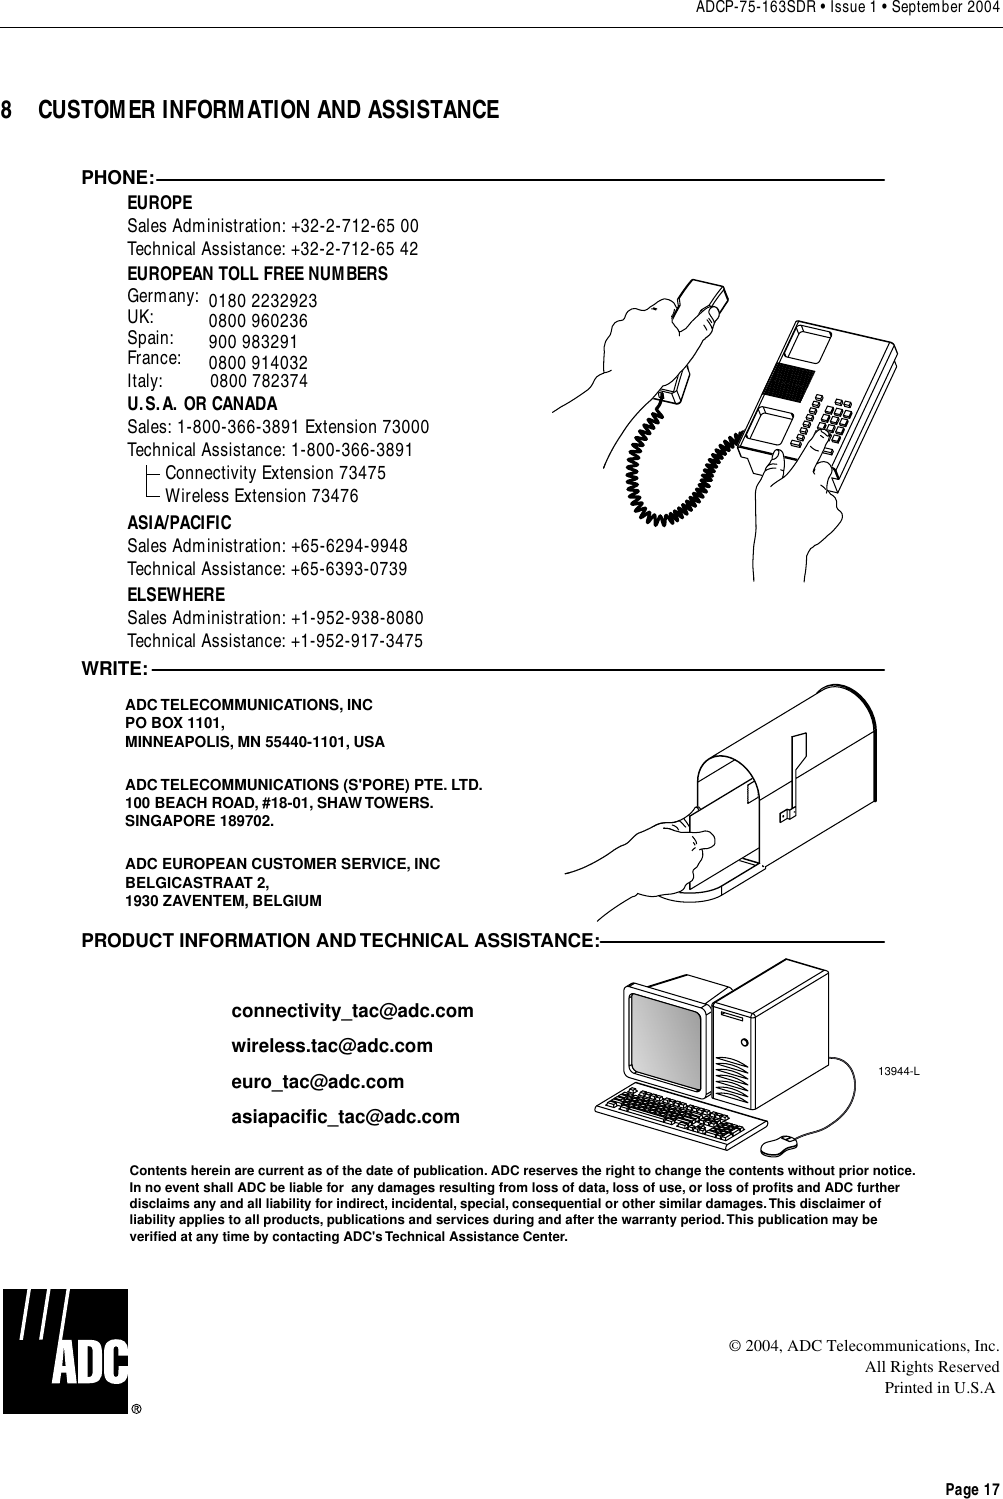 ADCP-75-163SDR • Issue 1 • September 2004Page 178 CUSTOMER INFORMATION AND ASSISTANCE© 2004, ADC Telecommunications, Inc.All Rights ReservedPrinted in U.S.A13944-LWRITE:ADC TELECOMMUNICATIONS, INCPO BOX 1101,MINNEAPOLIS, MN 55440-1101, USAADC TELECOMMUNICATIONS (S&apos;PORE) PTE. LTD.100 BEACH ROAD, #18-01, SHAW TOWERS.SINGAPORE 189702.ADC EUROPEAN CUSTOMER SERVICE, INCBELGICASTRAAT 2,1930 ZAVENTEM, BELGIUMPHONE:EUROPESales Administration: +32-2-712-65 00Technical Assistance: +32-2-712-65 42EUROPEAN TOLL FREE NUMBERSUK: 0800 960236Spain: 900 983291France: 0800 914032Germany: 0180 2232923U.S.A. OR CANADASales: 1-800-366-3891 Extension 73000Technical Assistance: 1-800-366-3891        Connectivity Extension 73475        Wireless Extension 73476ASIA/PACIFICSales Administration: +65-6294-9948Technical Assistance: +65-6393-0739ELSEWHERESales Administration: +1-952-938-8080Technical Assistance: +1-952-917-3475Italy:          0800 782374PRODUCT INFORMATION AND TECHNICAL ASSISTANCE:Contents herein are current as of the date of publication. ADC reserves the right to change the contents without prior notice.In no event shall ADC be liable for  any damages resulting from loss of data, loss of use, or loss of profits and ADC furtherdisclaims any and all liability for indirect, incidental, special, consequential or other similar damages. This disclaimer ofliability applies to all products, publications and services during and after the warranty period. This publication may beverified at any time by contacting ADC&apos;s Technical Assistance Center. euro_tac@adc.comasiapacific_tac@adc.comwireless.tac@adc.comconnectivity_tac@adc.com